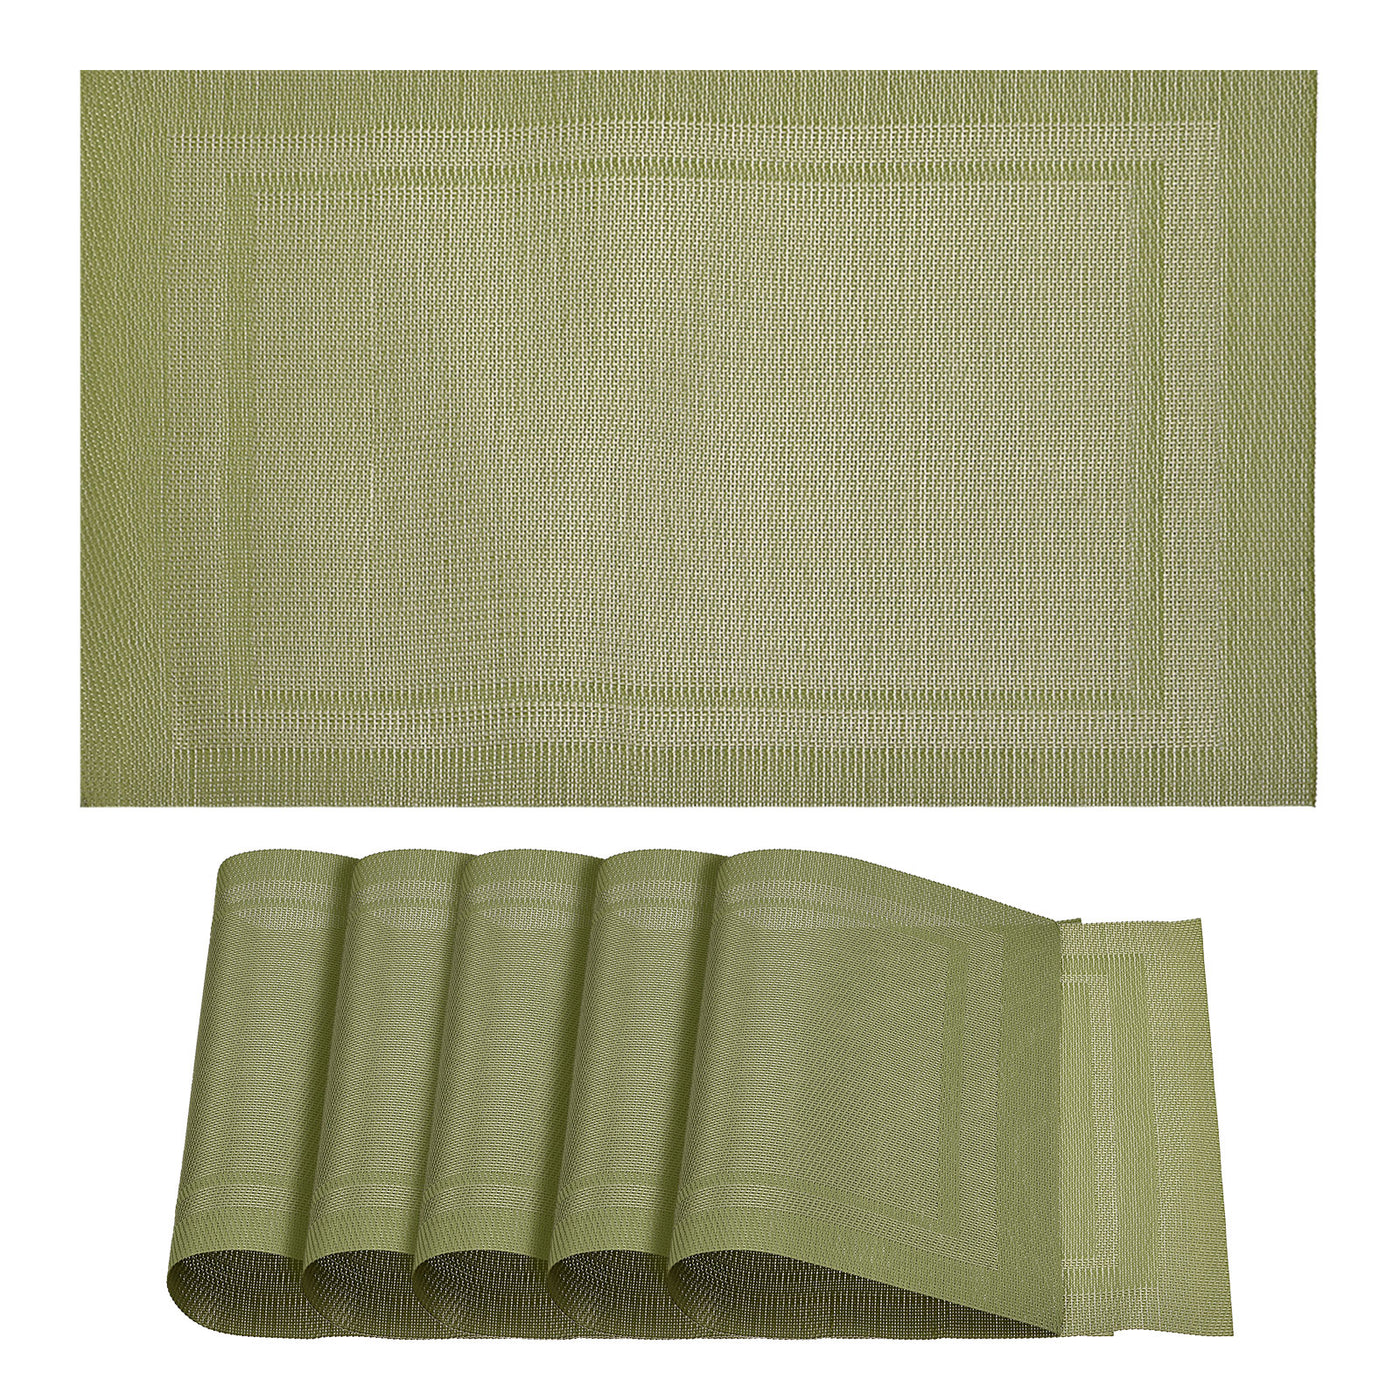 uxcell Uxcell Place Mats, 450x300mm Table Mats Set of 6 PVC Washable Woven Placemat Green